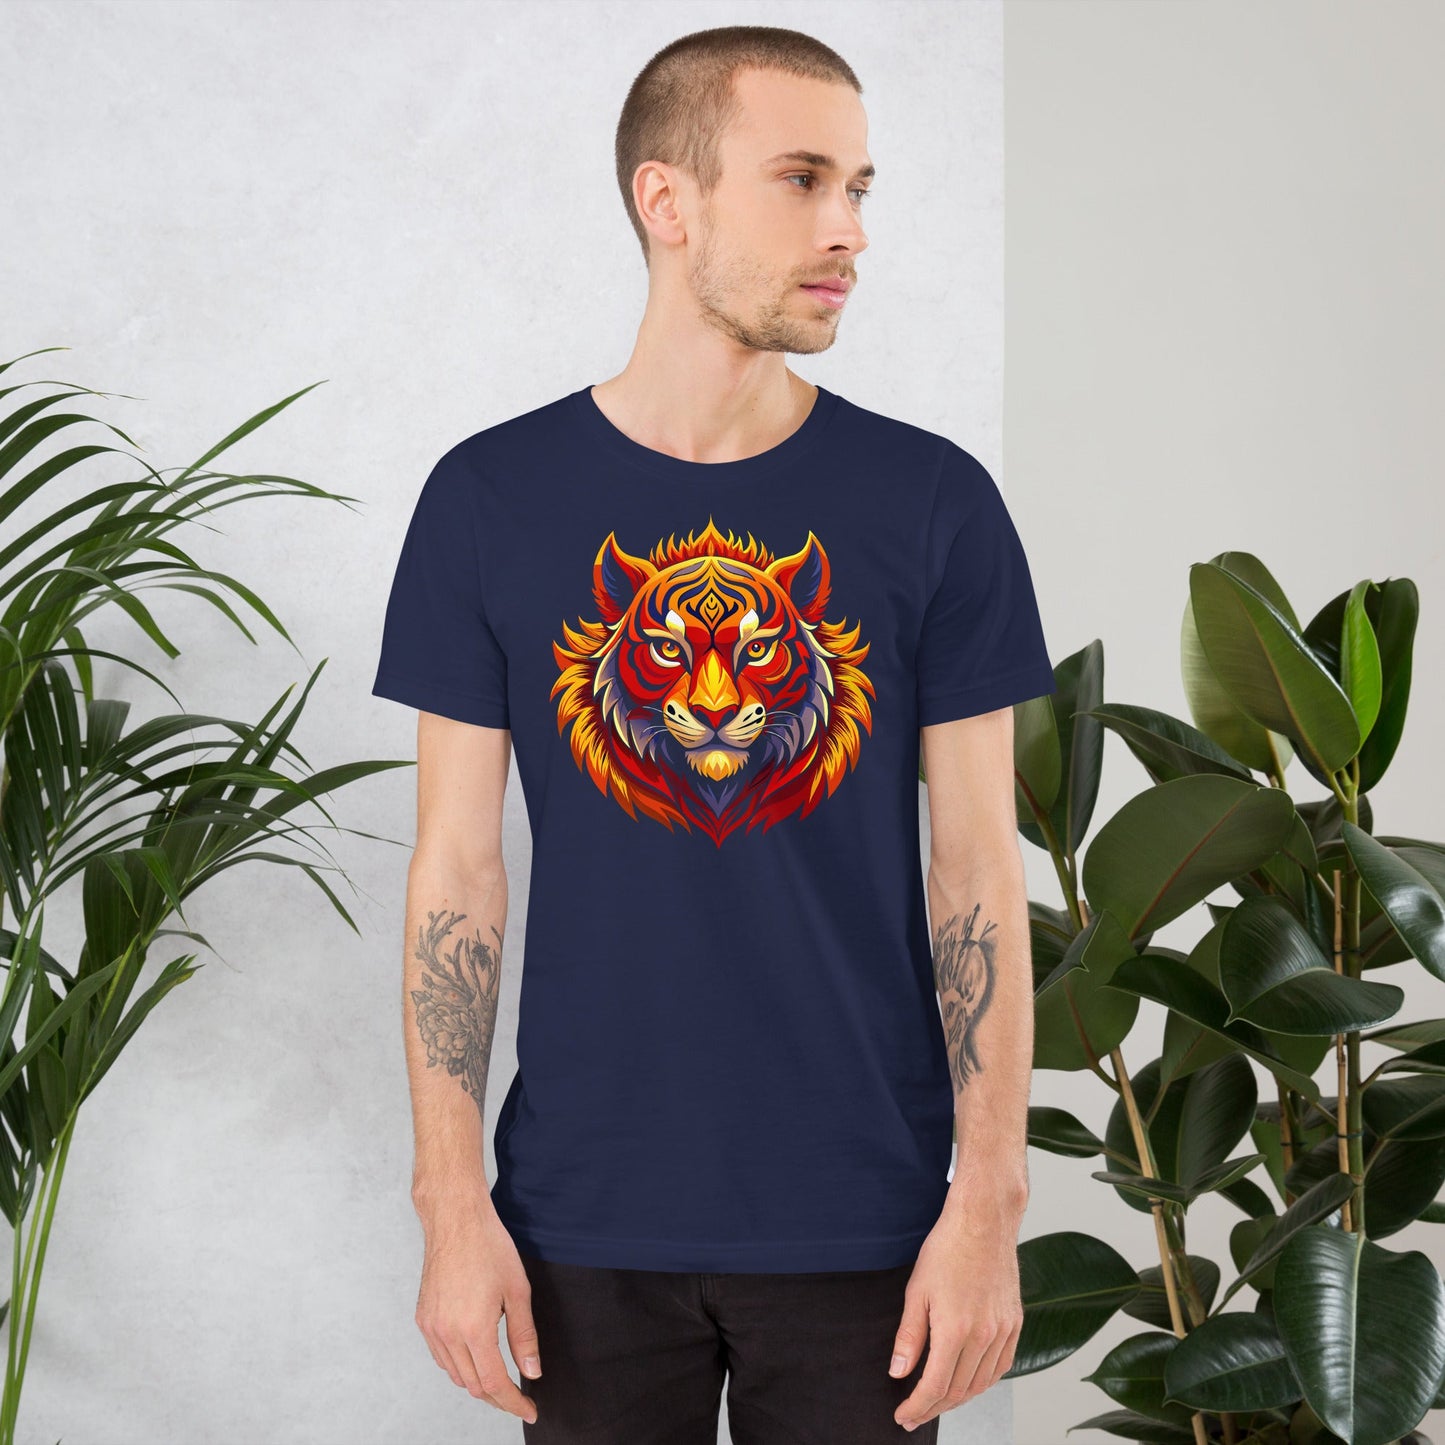 The i of the Tiger T-shirt